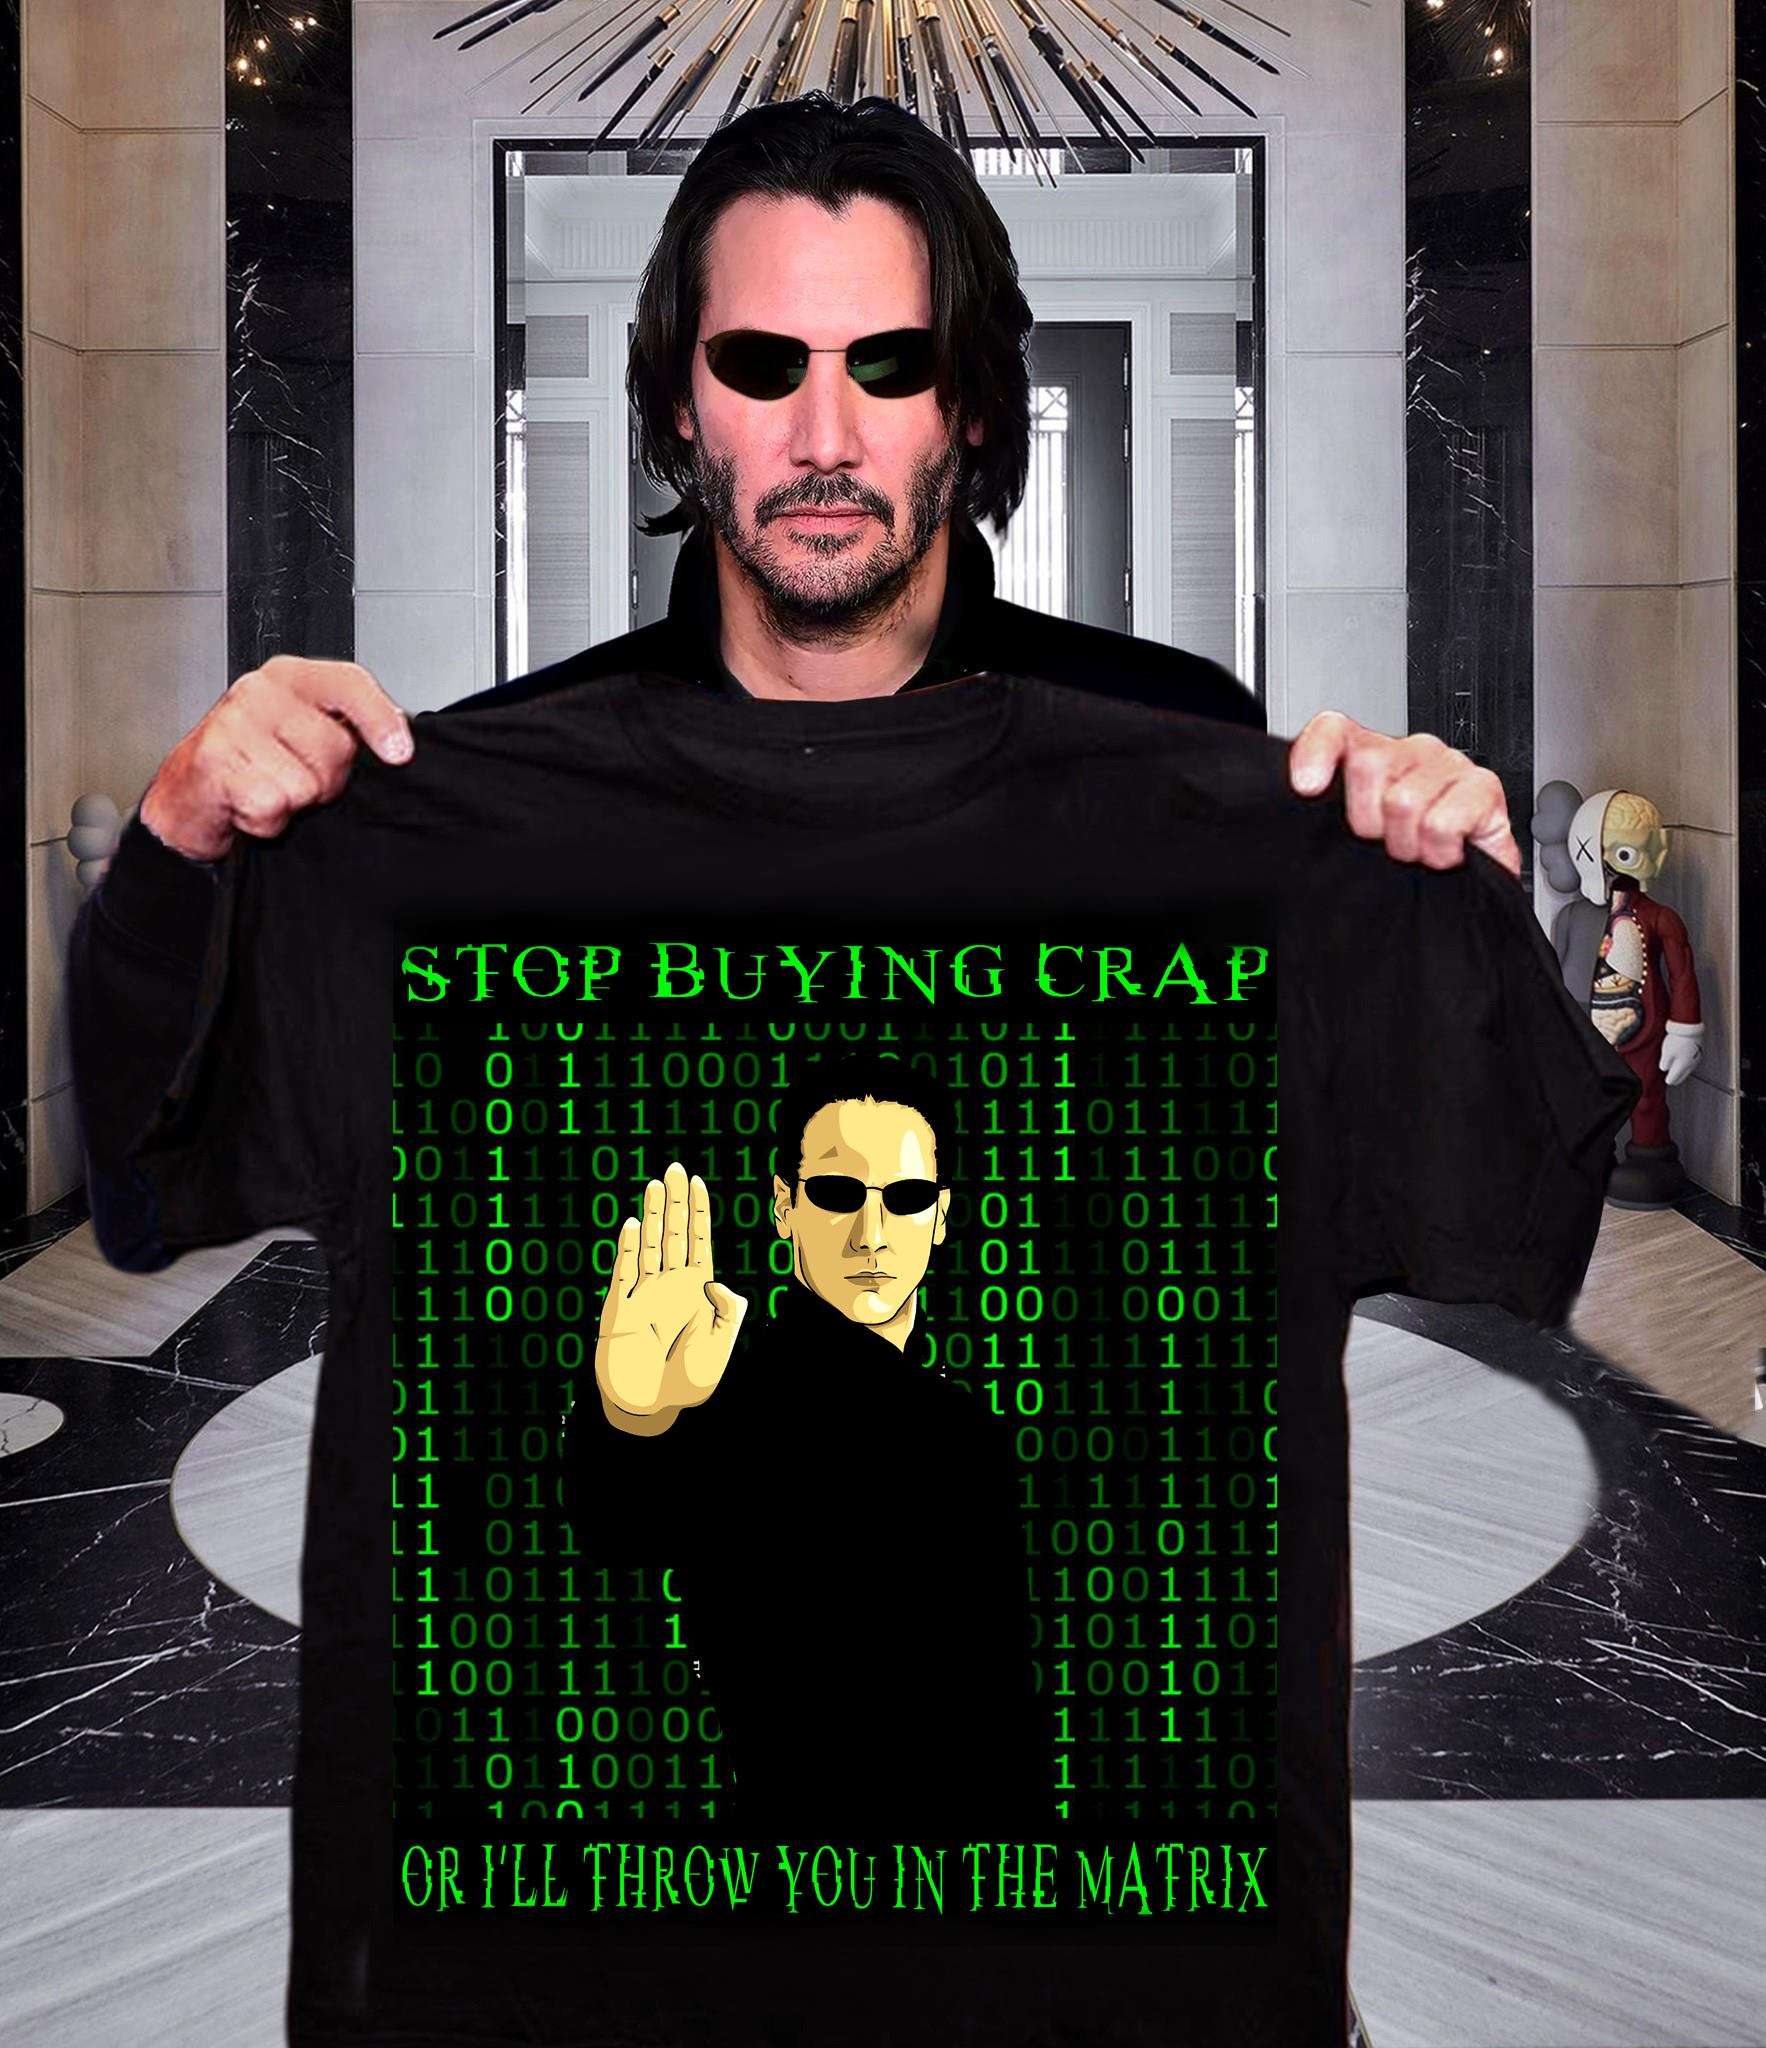 Stop buying crap or I'll throw you in the matrix - The matrix movie, Keanu Reaves